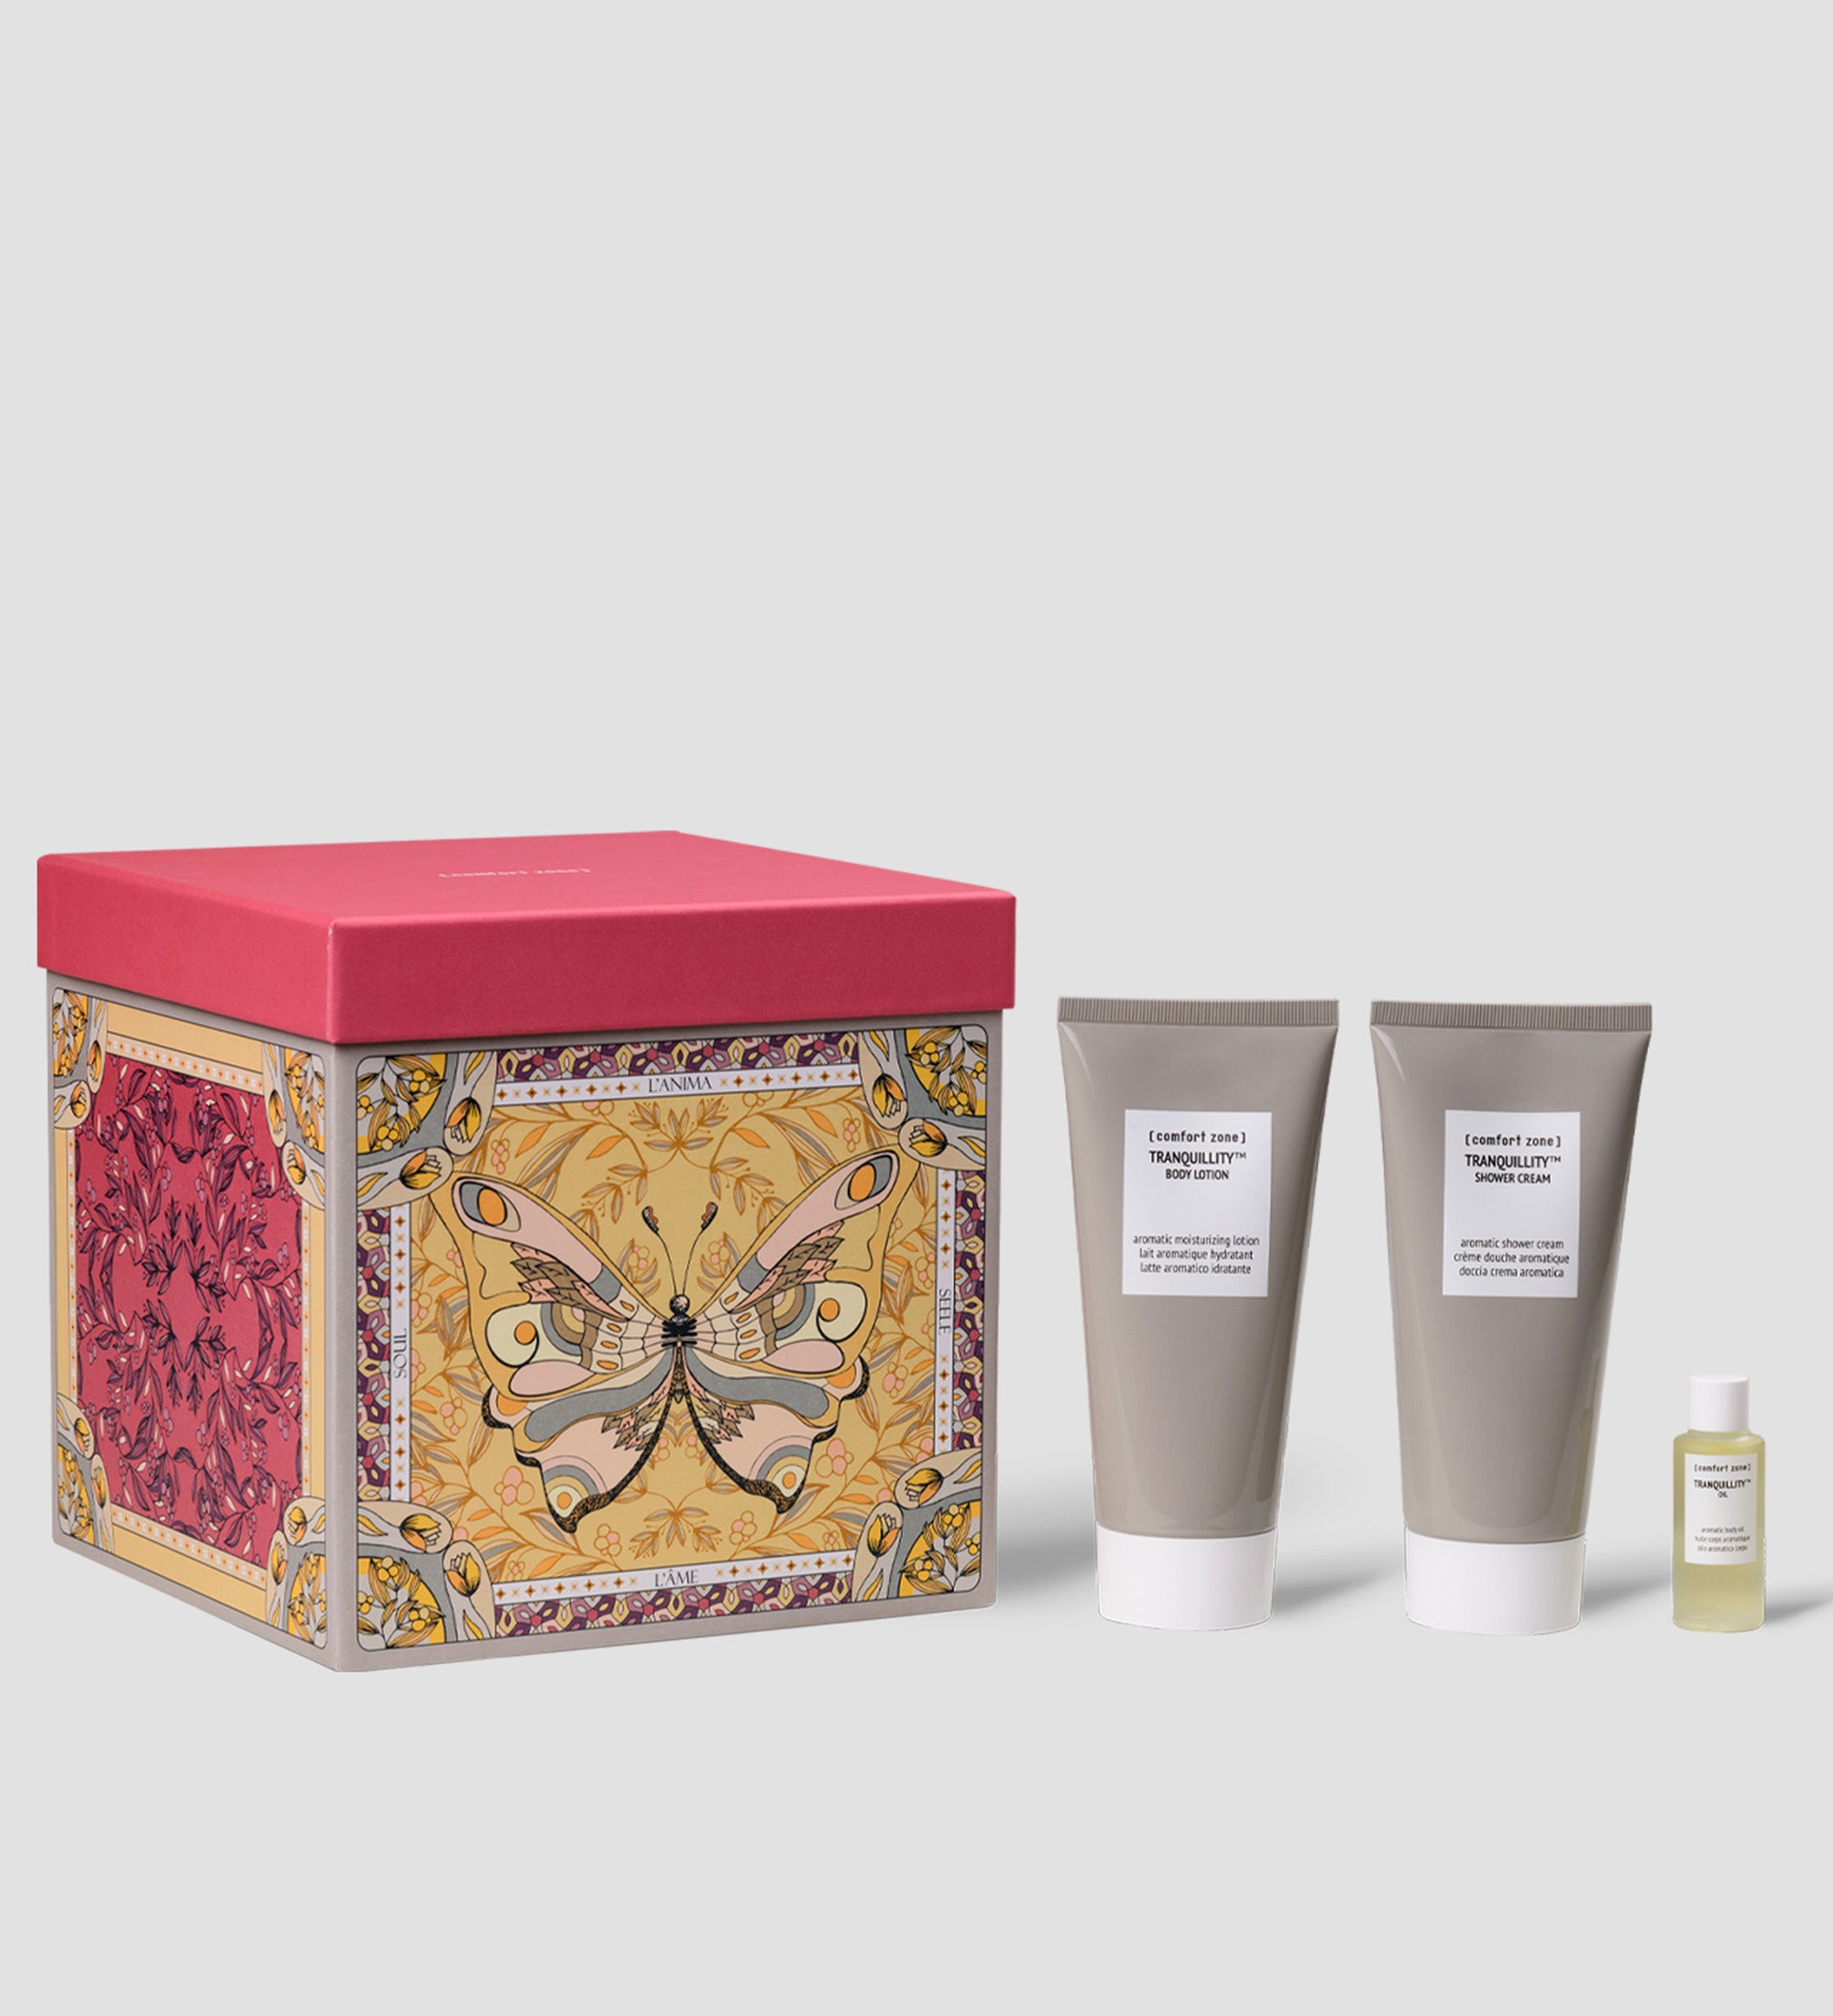 Comfort Zone: KIT REMEDY KIT Cleansing Soothing Face Kit-9498bc67-302d-4f6b-ab0a-a79008479e68.jpg